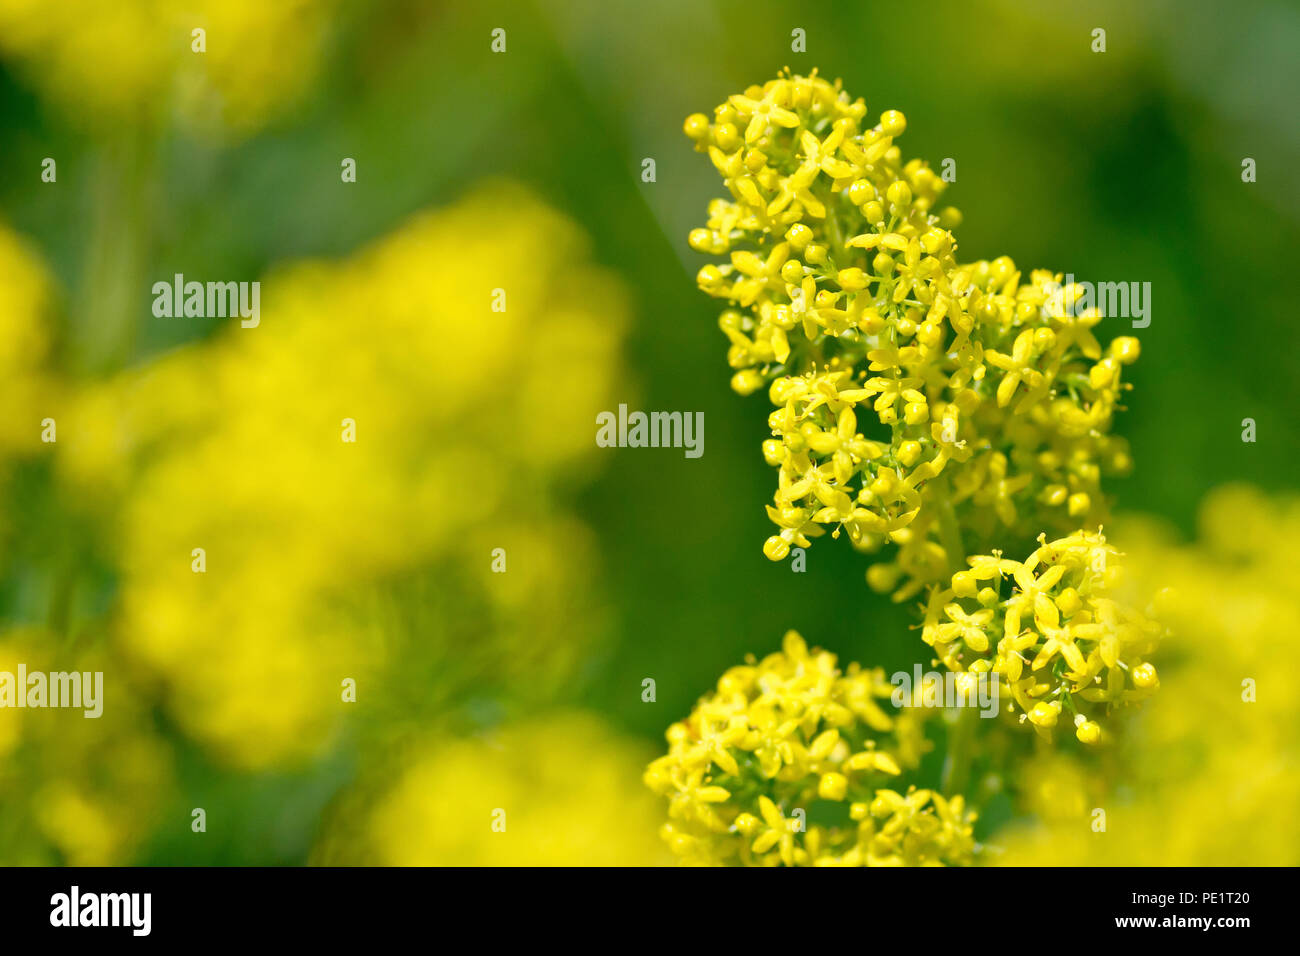 Lady's Bedstraw (galium verum), close up of a single flowering plant out of many. Stock Photo